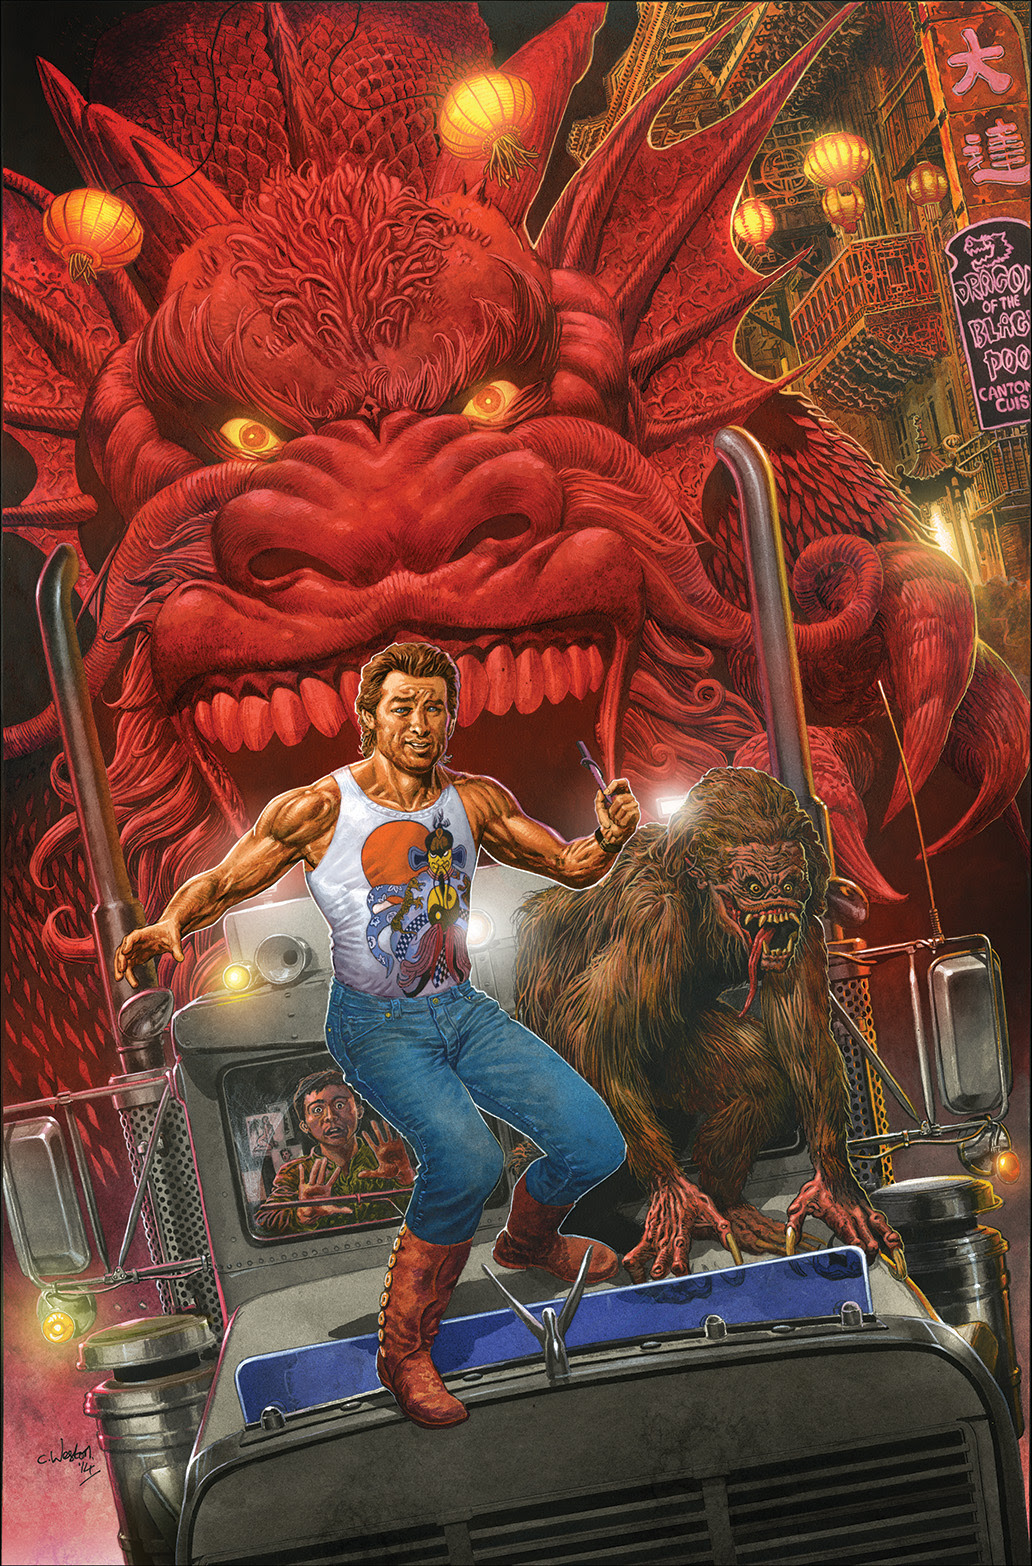 BIG TROUBLE IN LITTLE CHINA #1 Cover C by Chris Weston